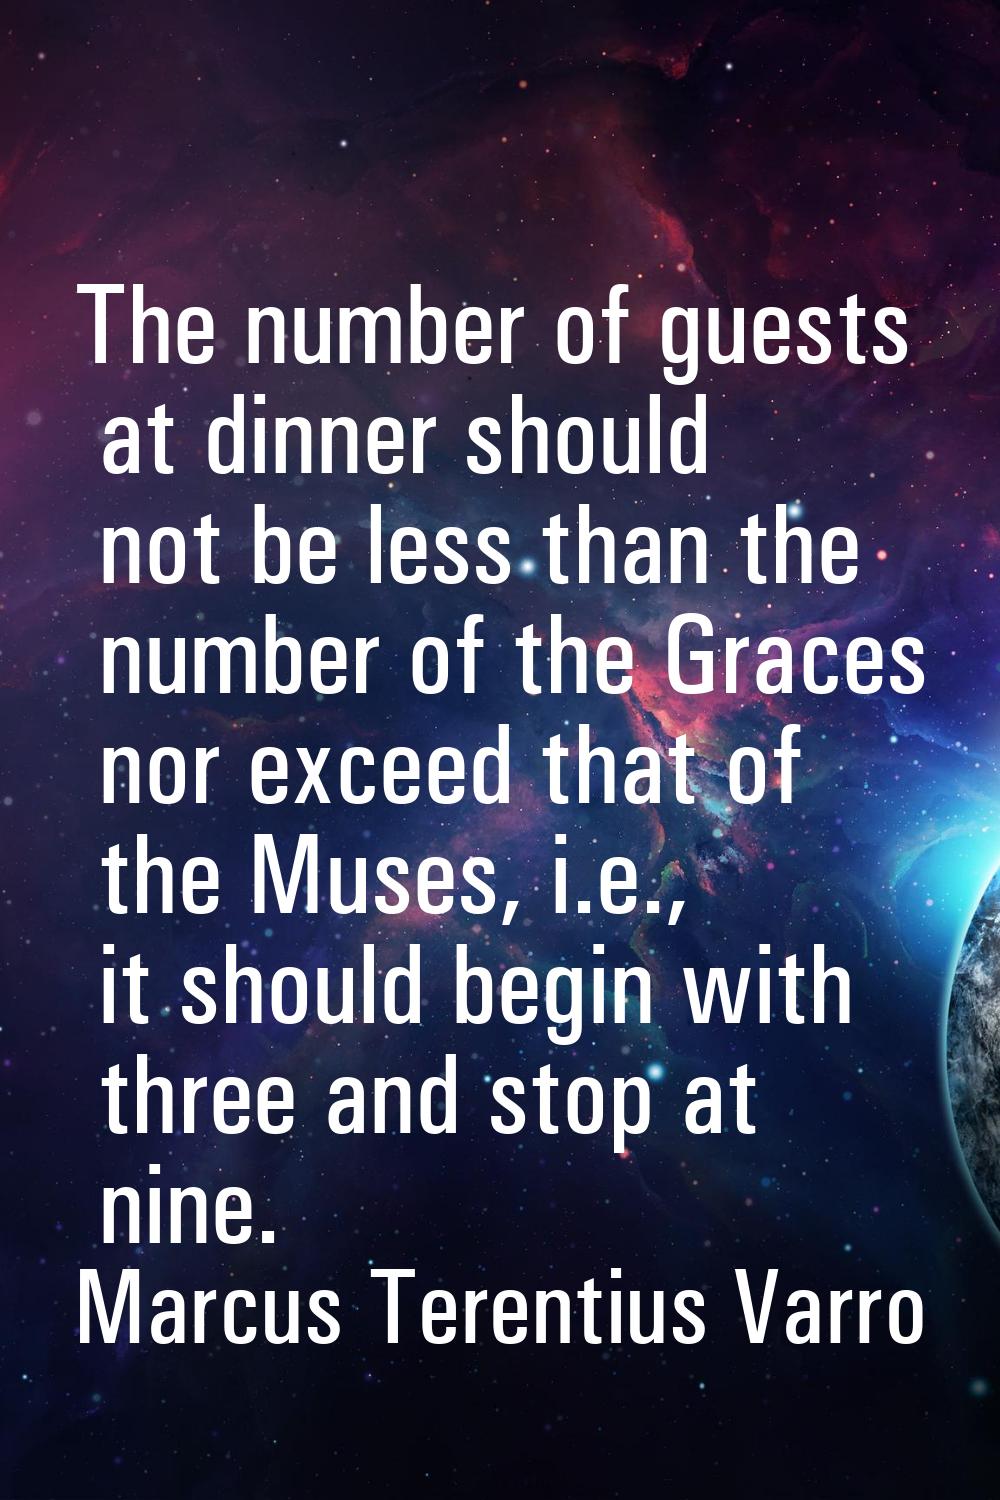 The number of guests at dinner should not be less than the number of the Graces nor exceed that of 